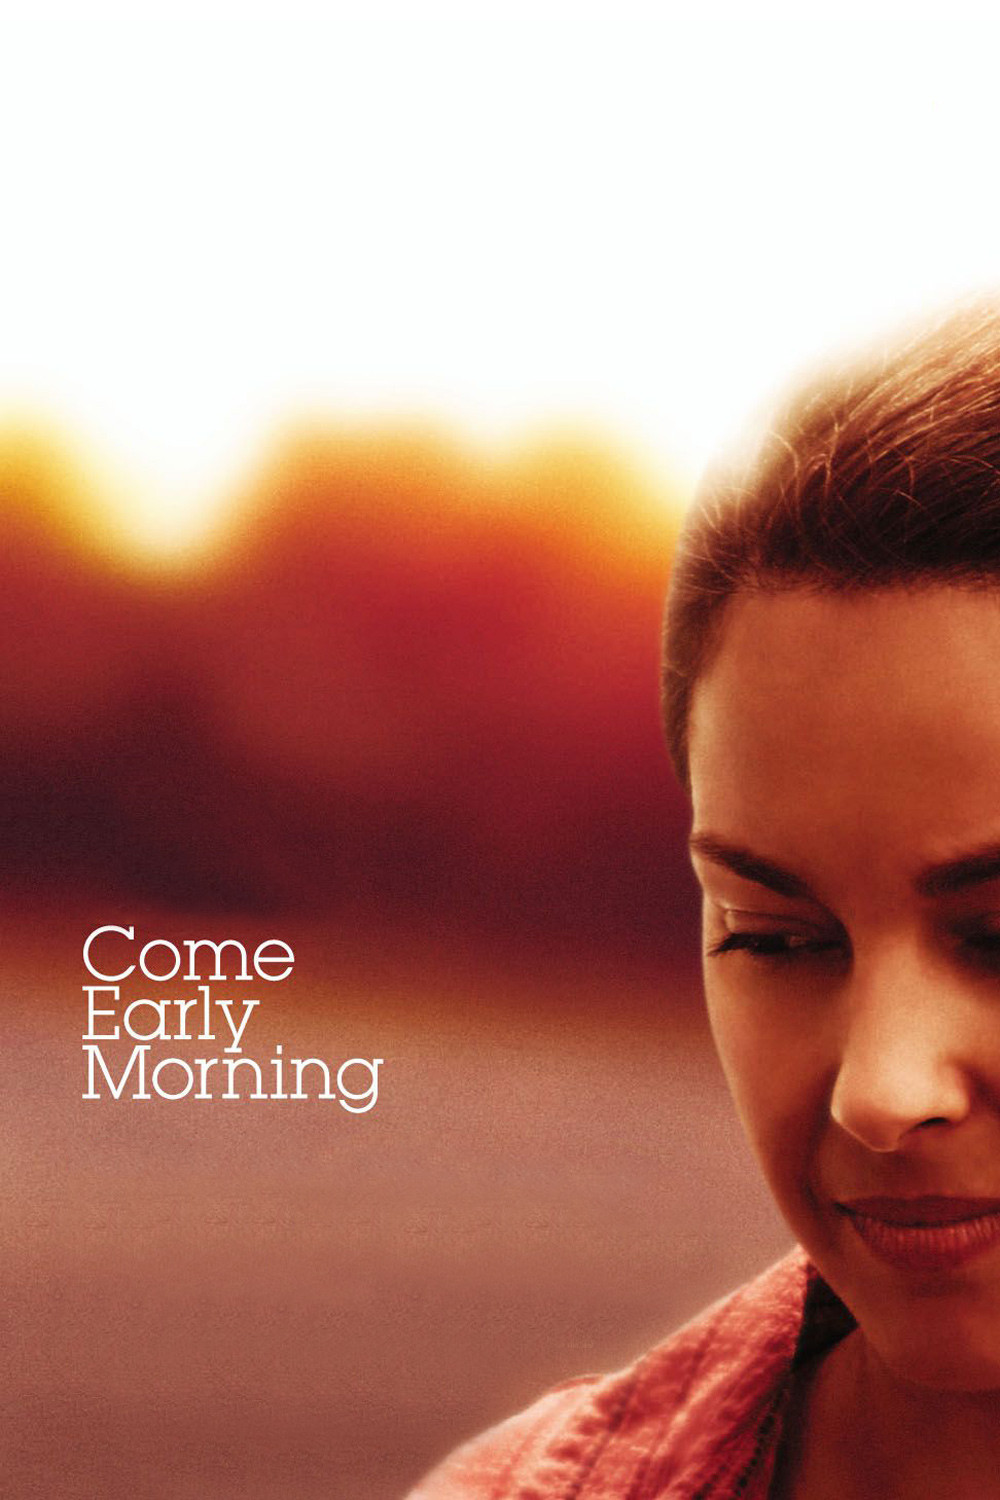 Poster for the movie "Come Early Morning"